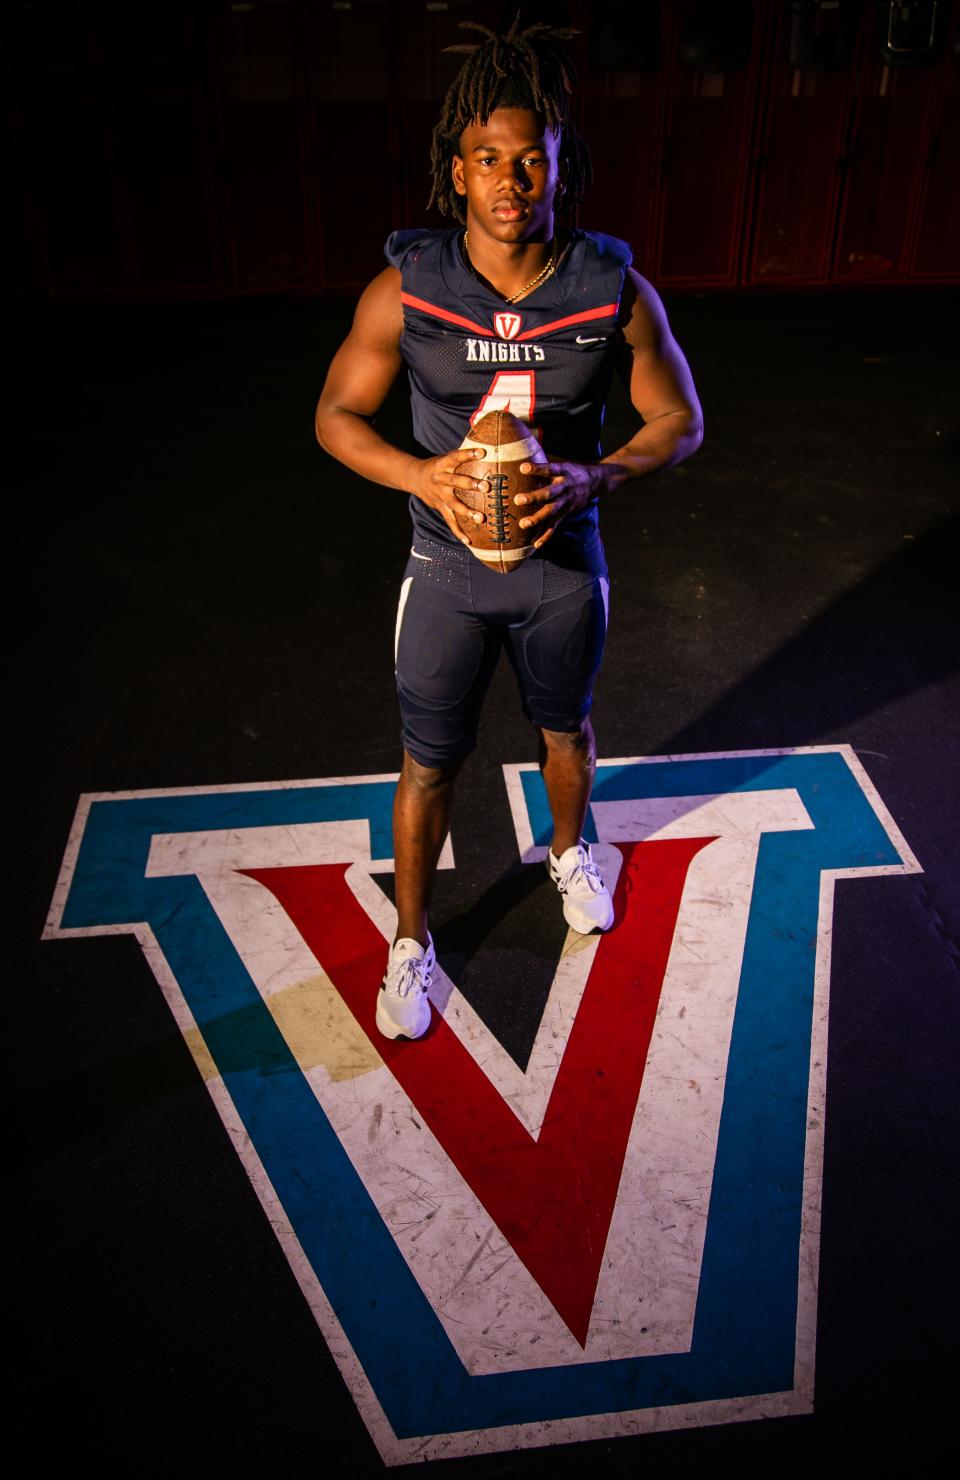 Vanguard High School's Quarterback and Safety, Fred Gaskin, is this year's Ocala Star Banner Overall Football Player of the Year. He posed for portraits Tuesday afternoon, February 15, 2022 in the locker room at the field house at Vanguard High School.